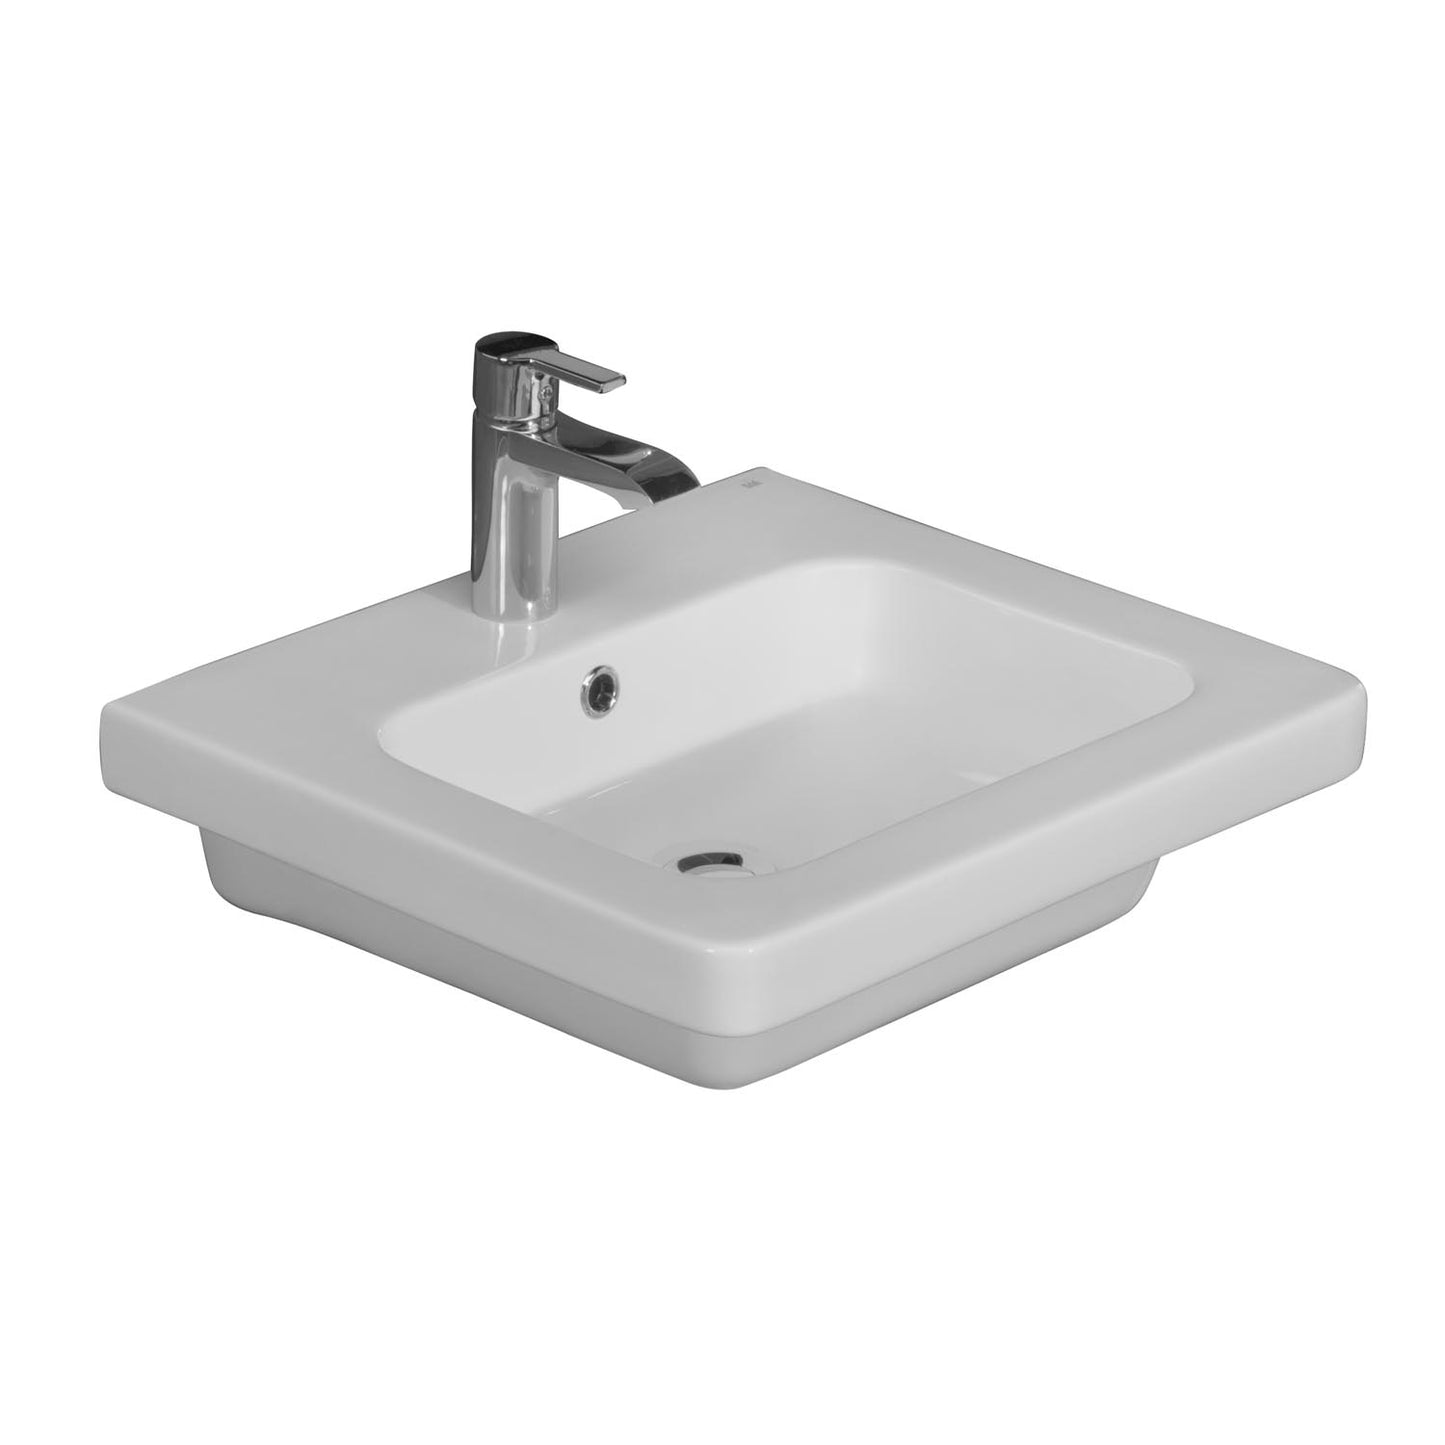 Resort 650 Wall Hung Bathroom Sink White with 1 Faucet Hole